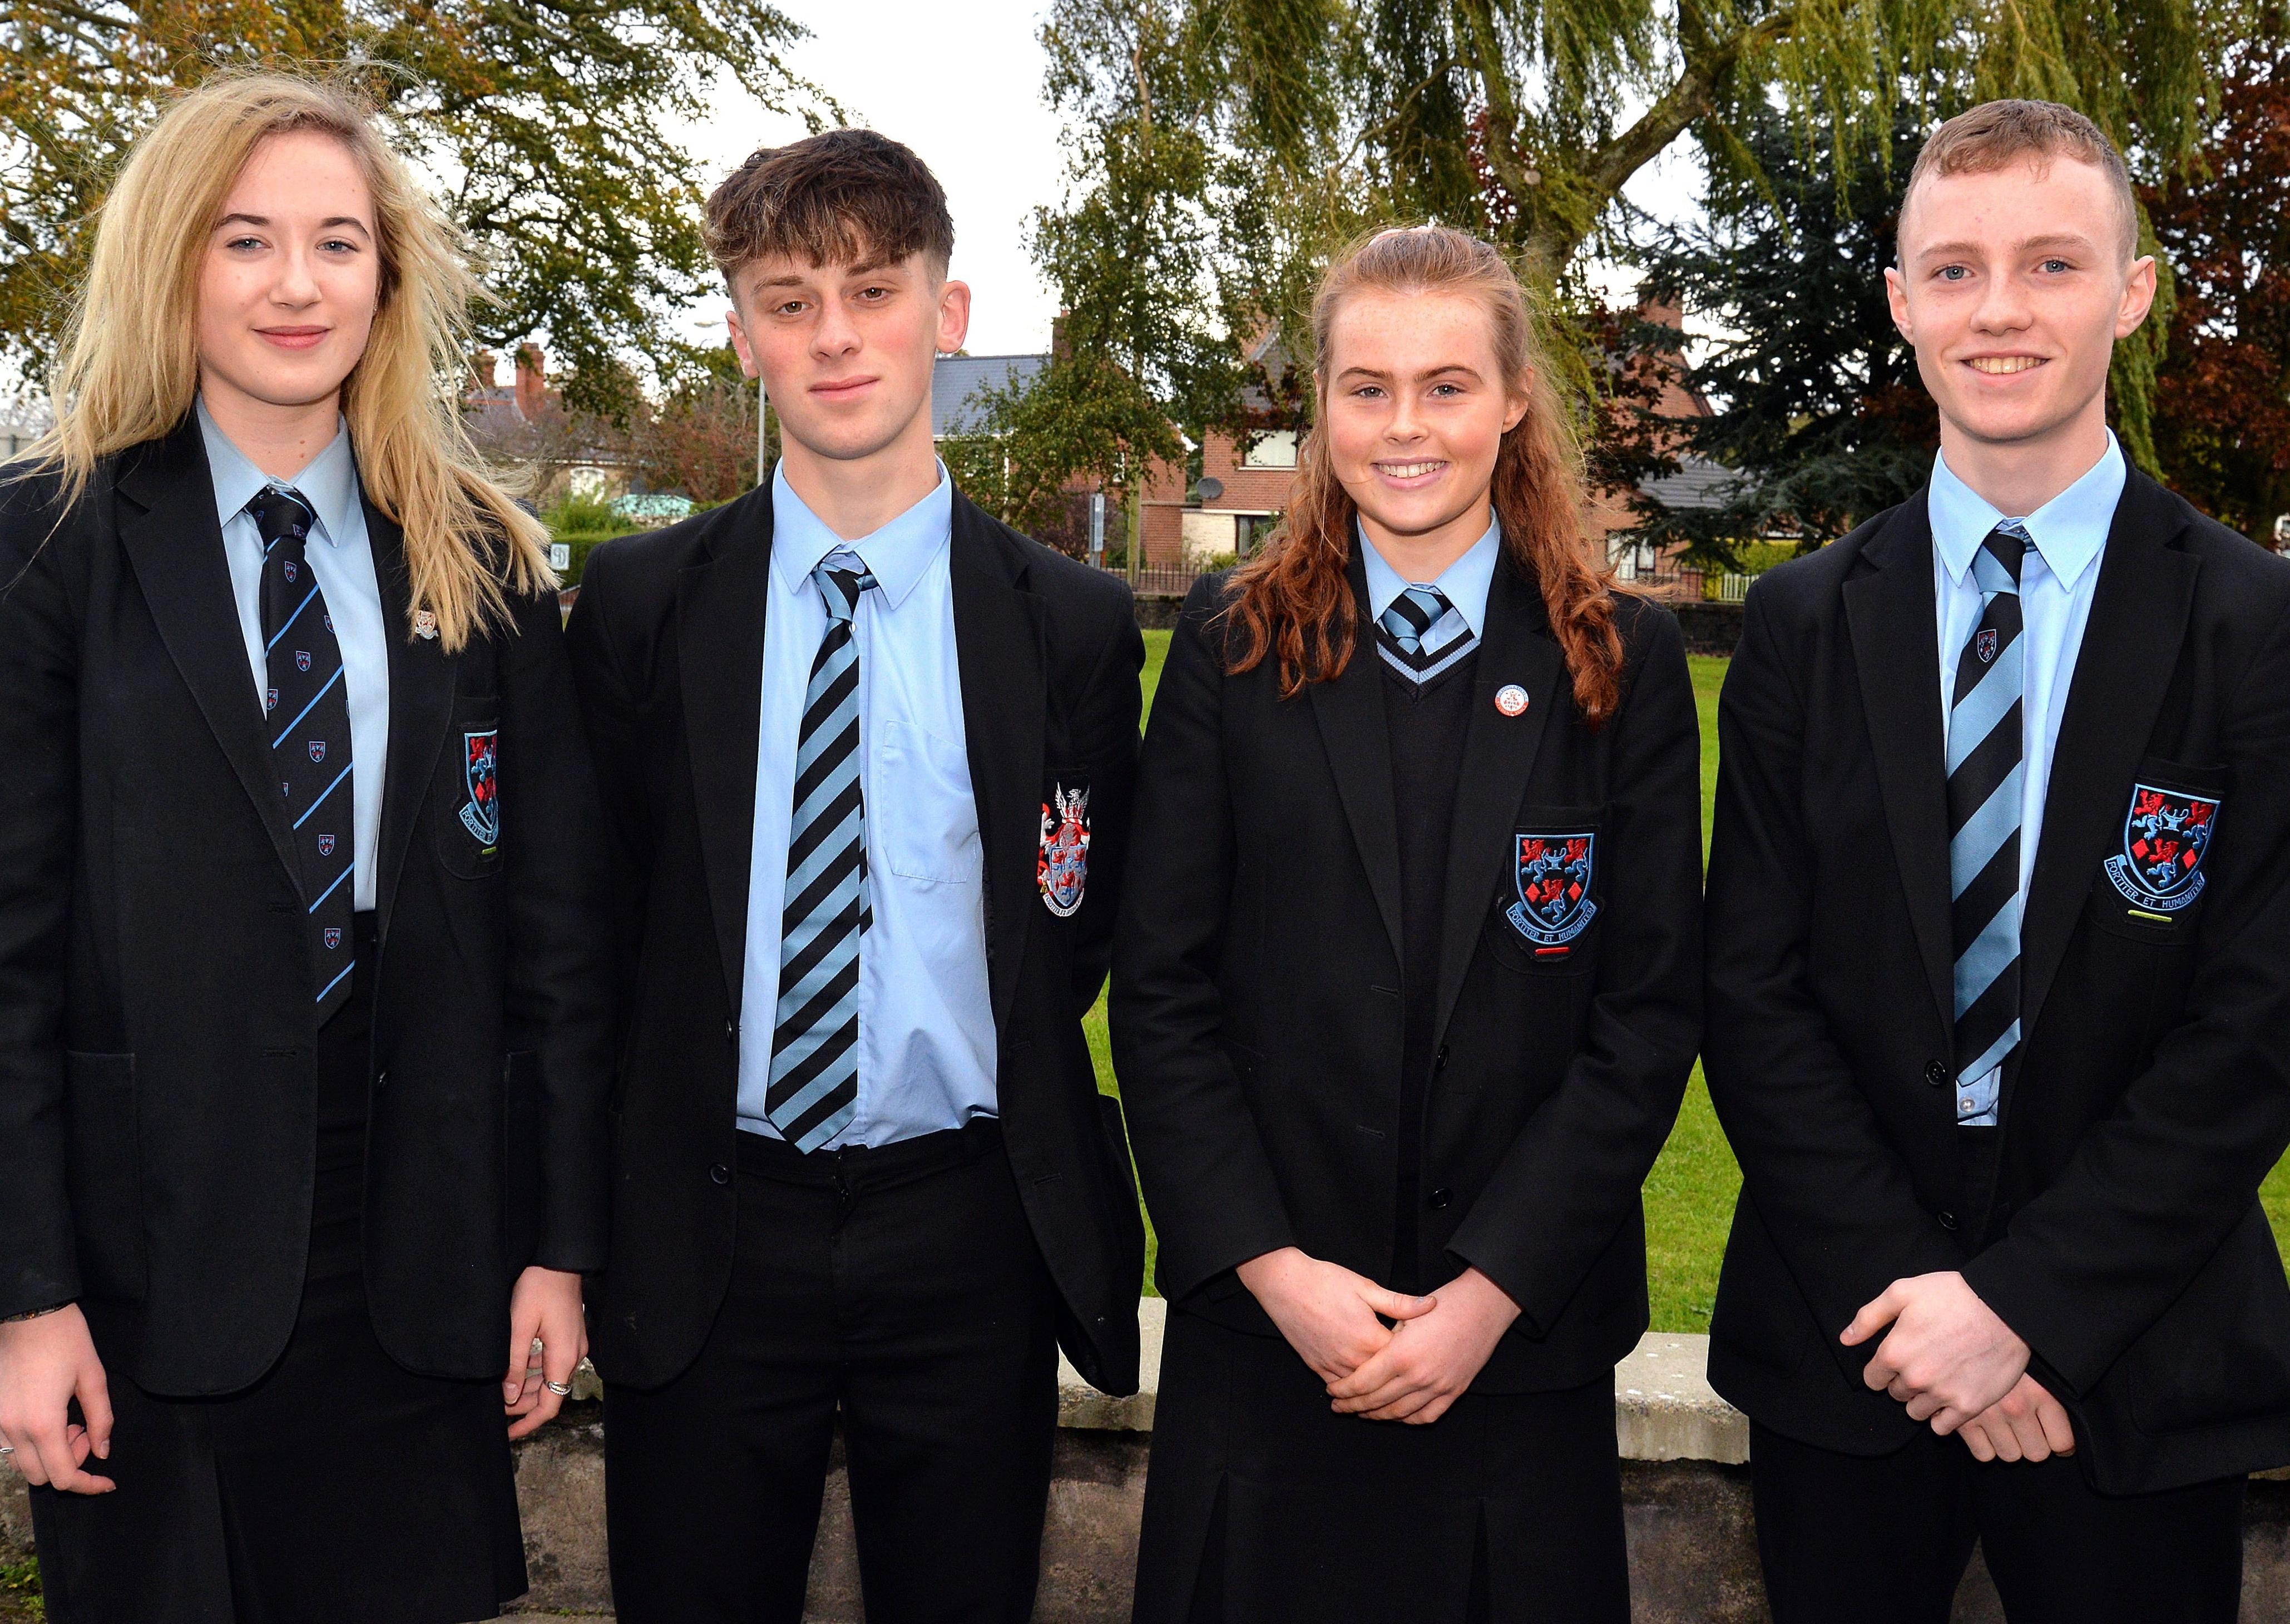 Portadown College pupils who were honoured for their sporting achievements at the school's annual Speech Day. Included from left are, Holly Teggart who represented Northern Irelandin Archery, Matthew Willis who competed in the 800m race at national level, Adam badger who competed in the Long Jump competition at National level, and Meadow McCauley who represented Ireland in Orienteering. INPT44-213.